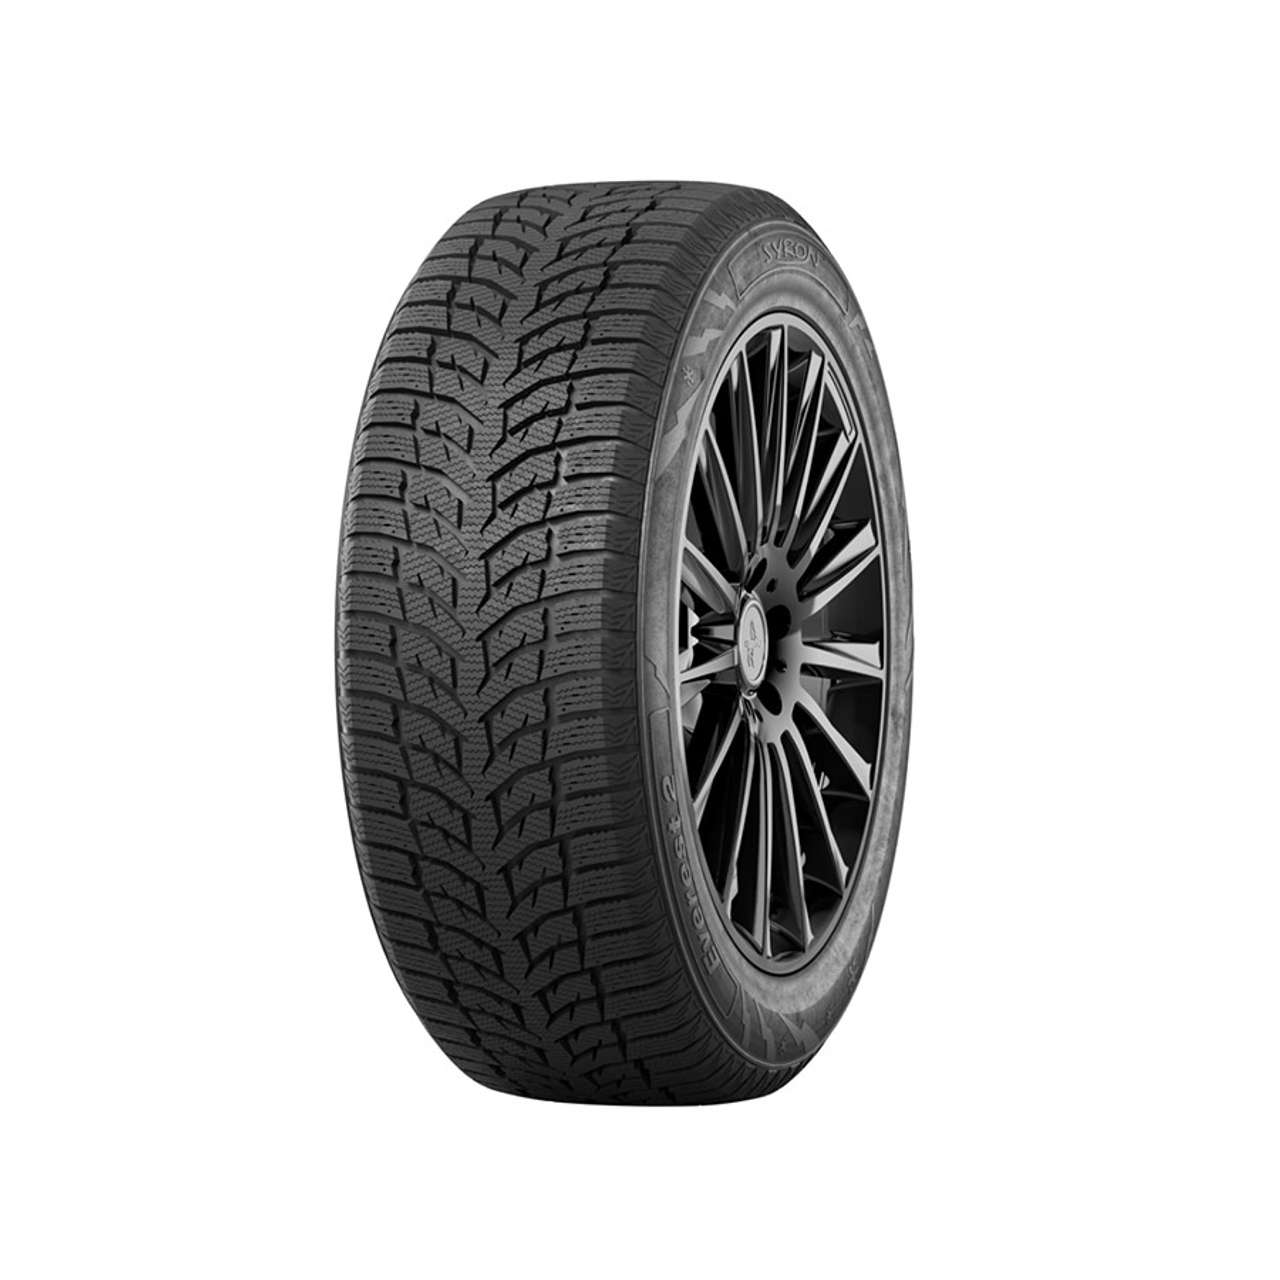 SYRON EVEREST 2 205/60R16 92T BSW